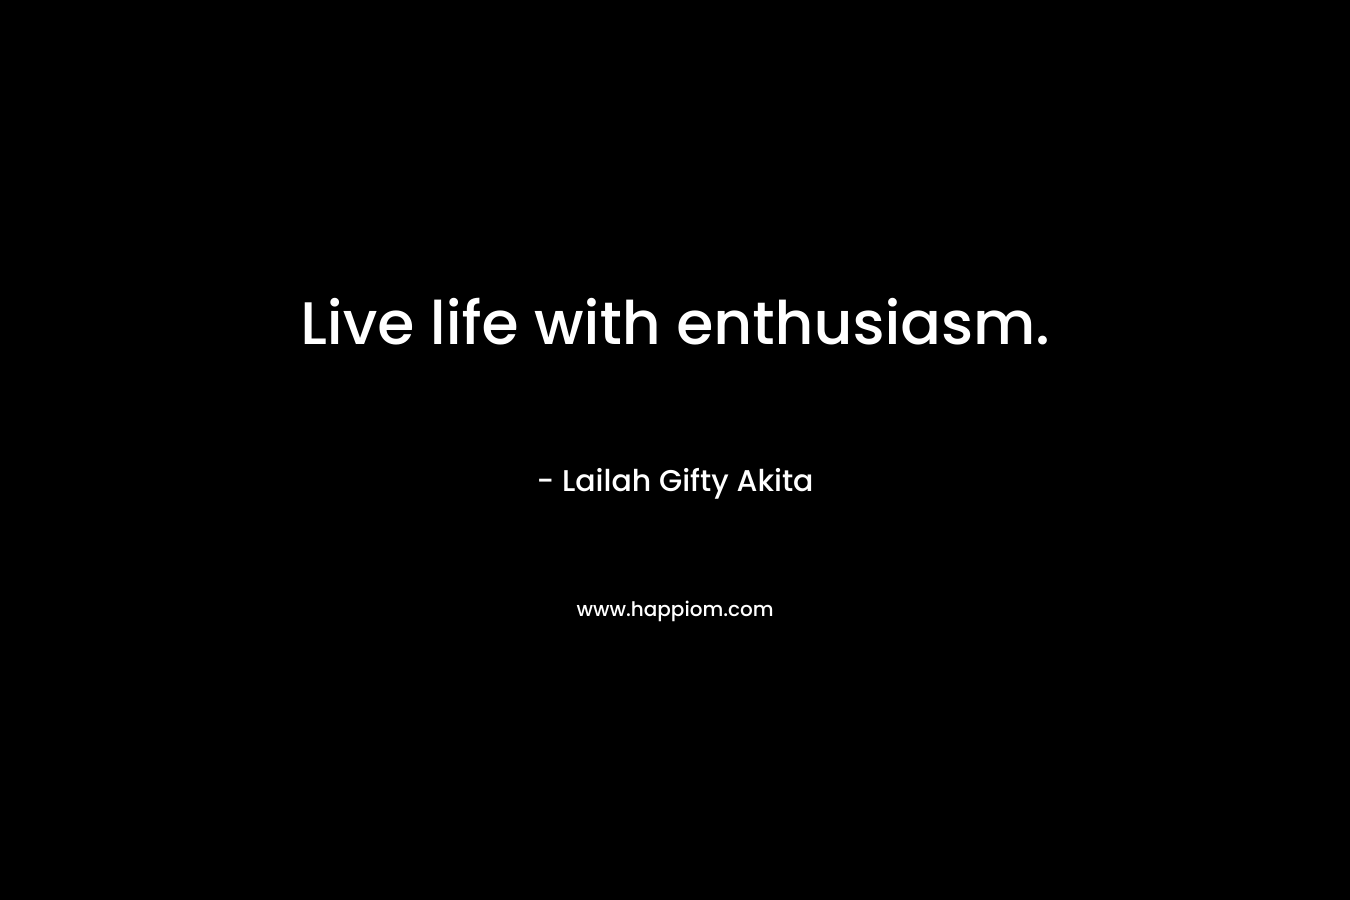 Live life with enthusiasm.